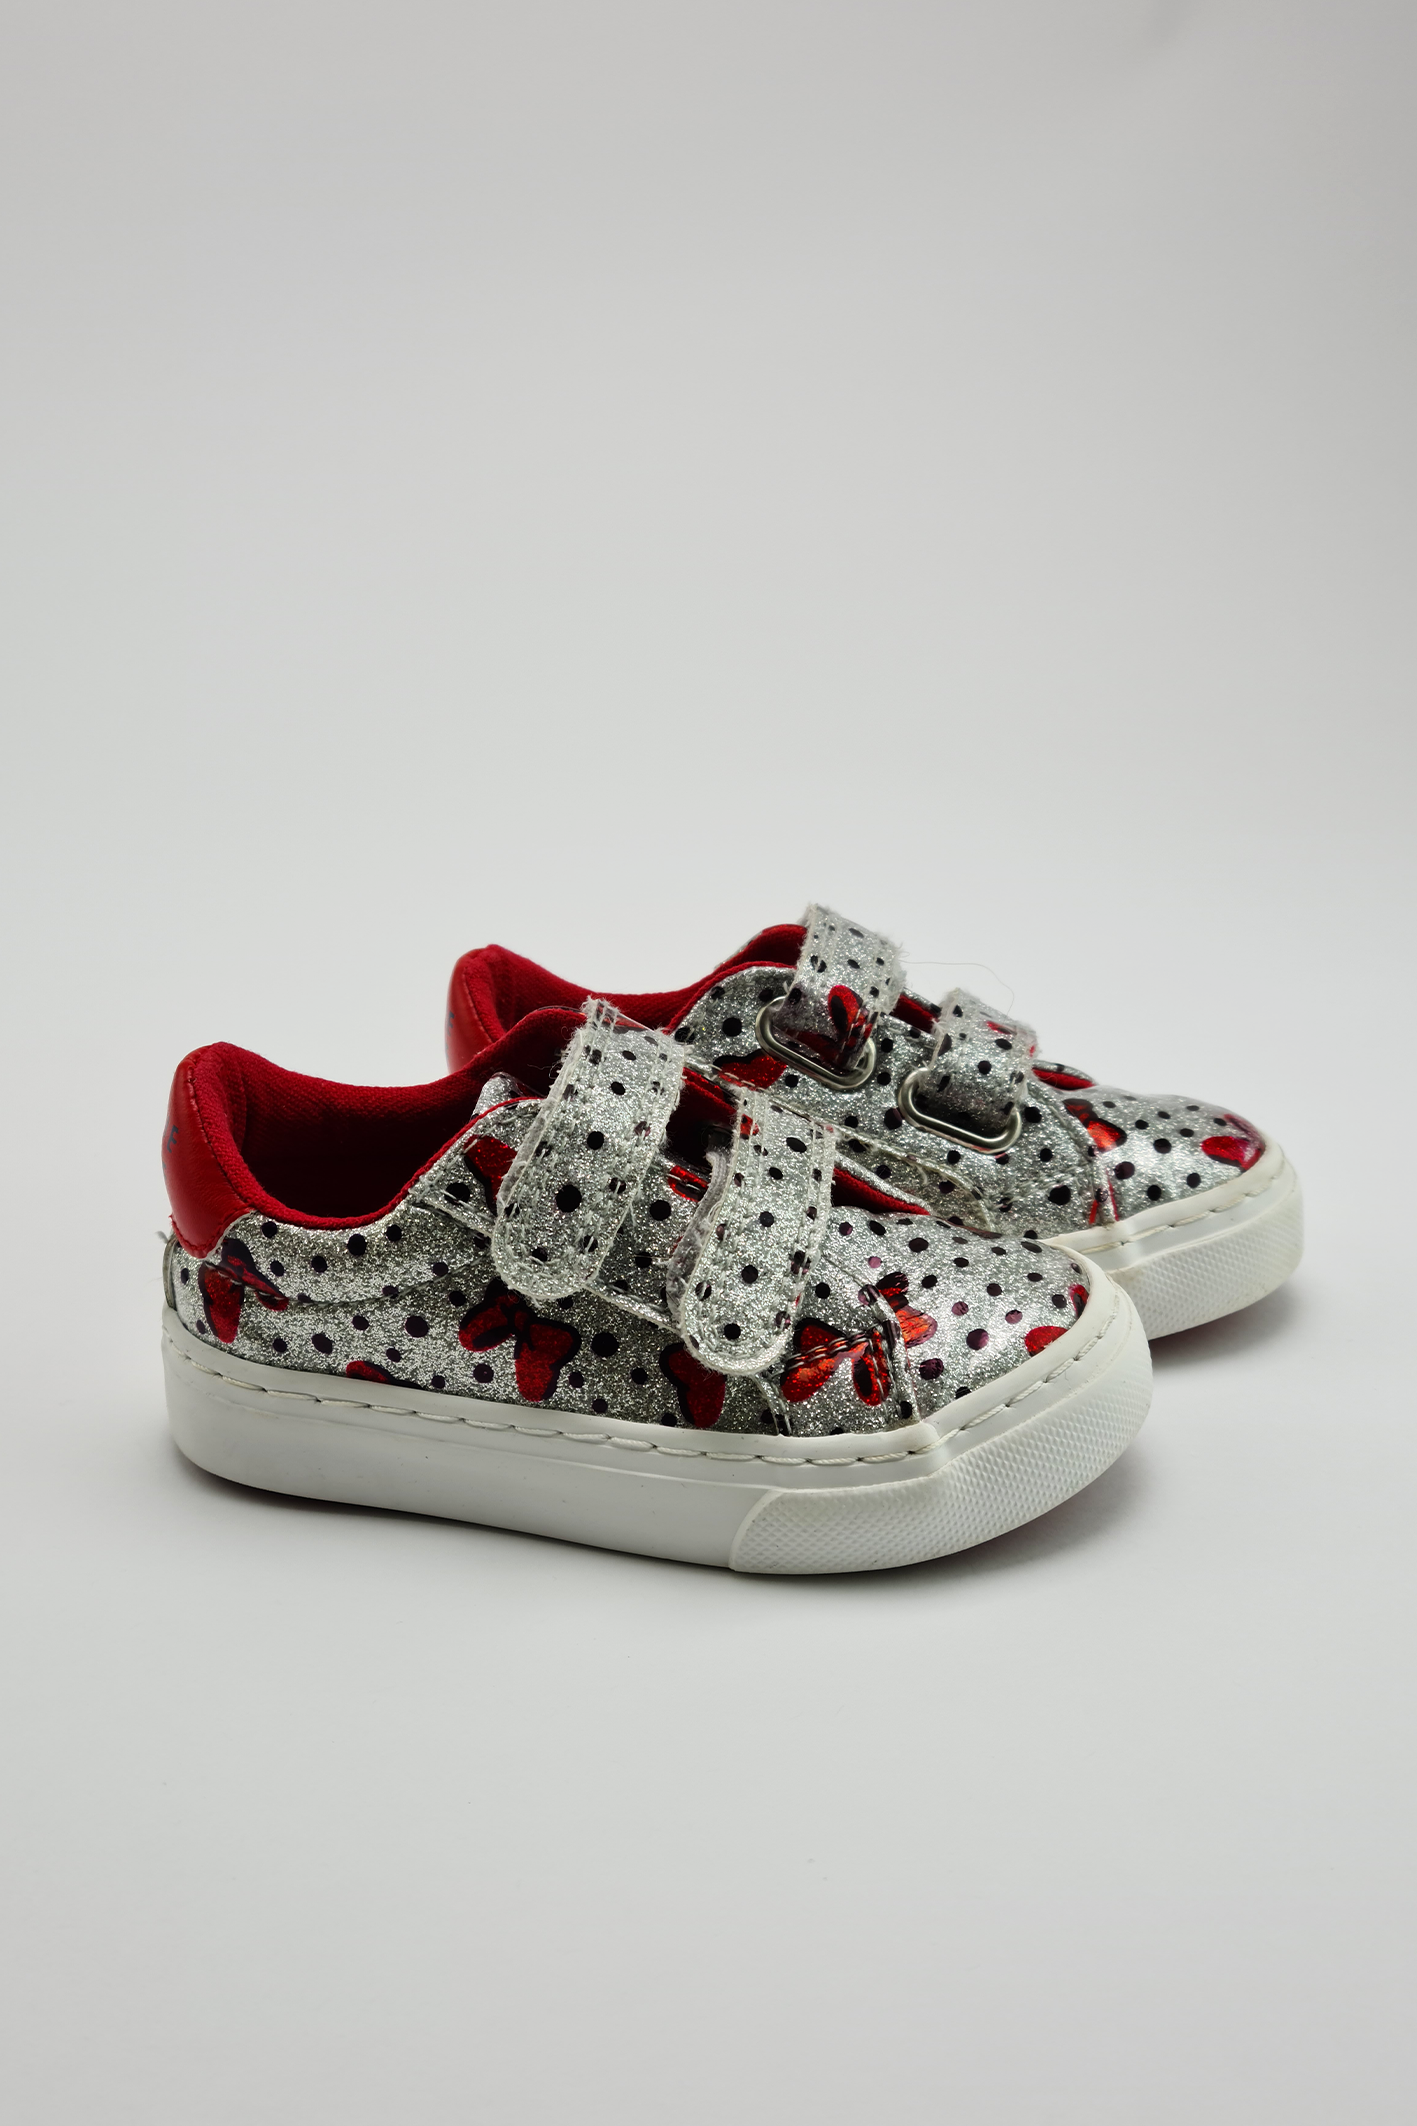 5 - Glittery Minnie Mouse trainers